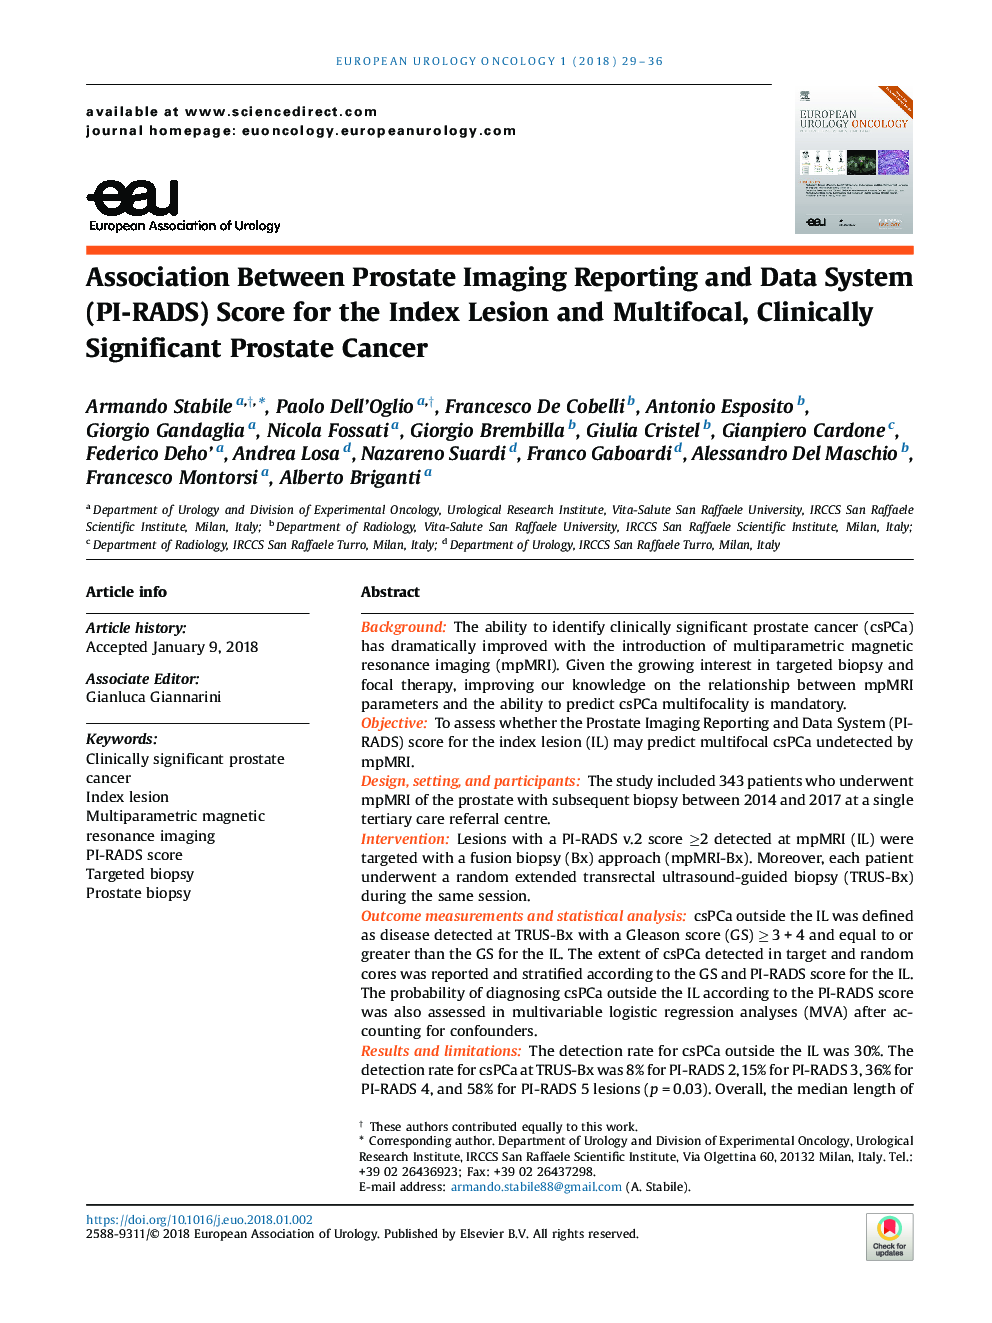 Association Between Prostate Imaging Reporting and Data System (PI-RADS) Score for the Index Lesion and Multifocal, Clinically Significant Prostate Cancer